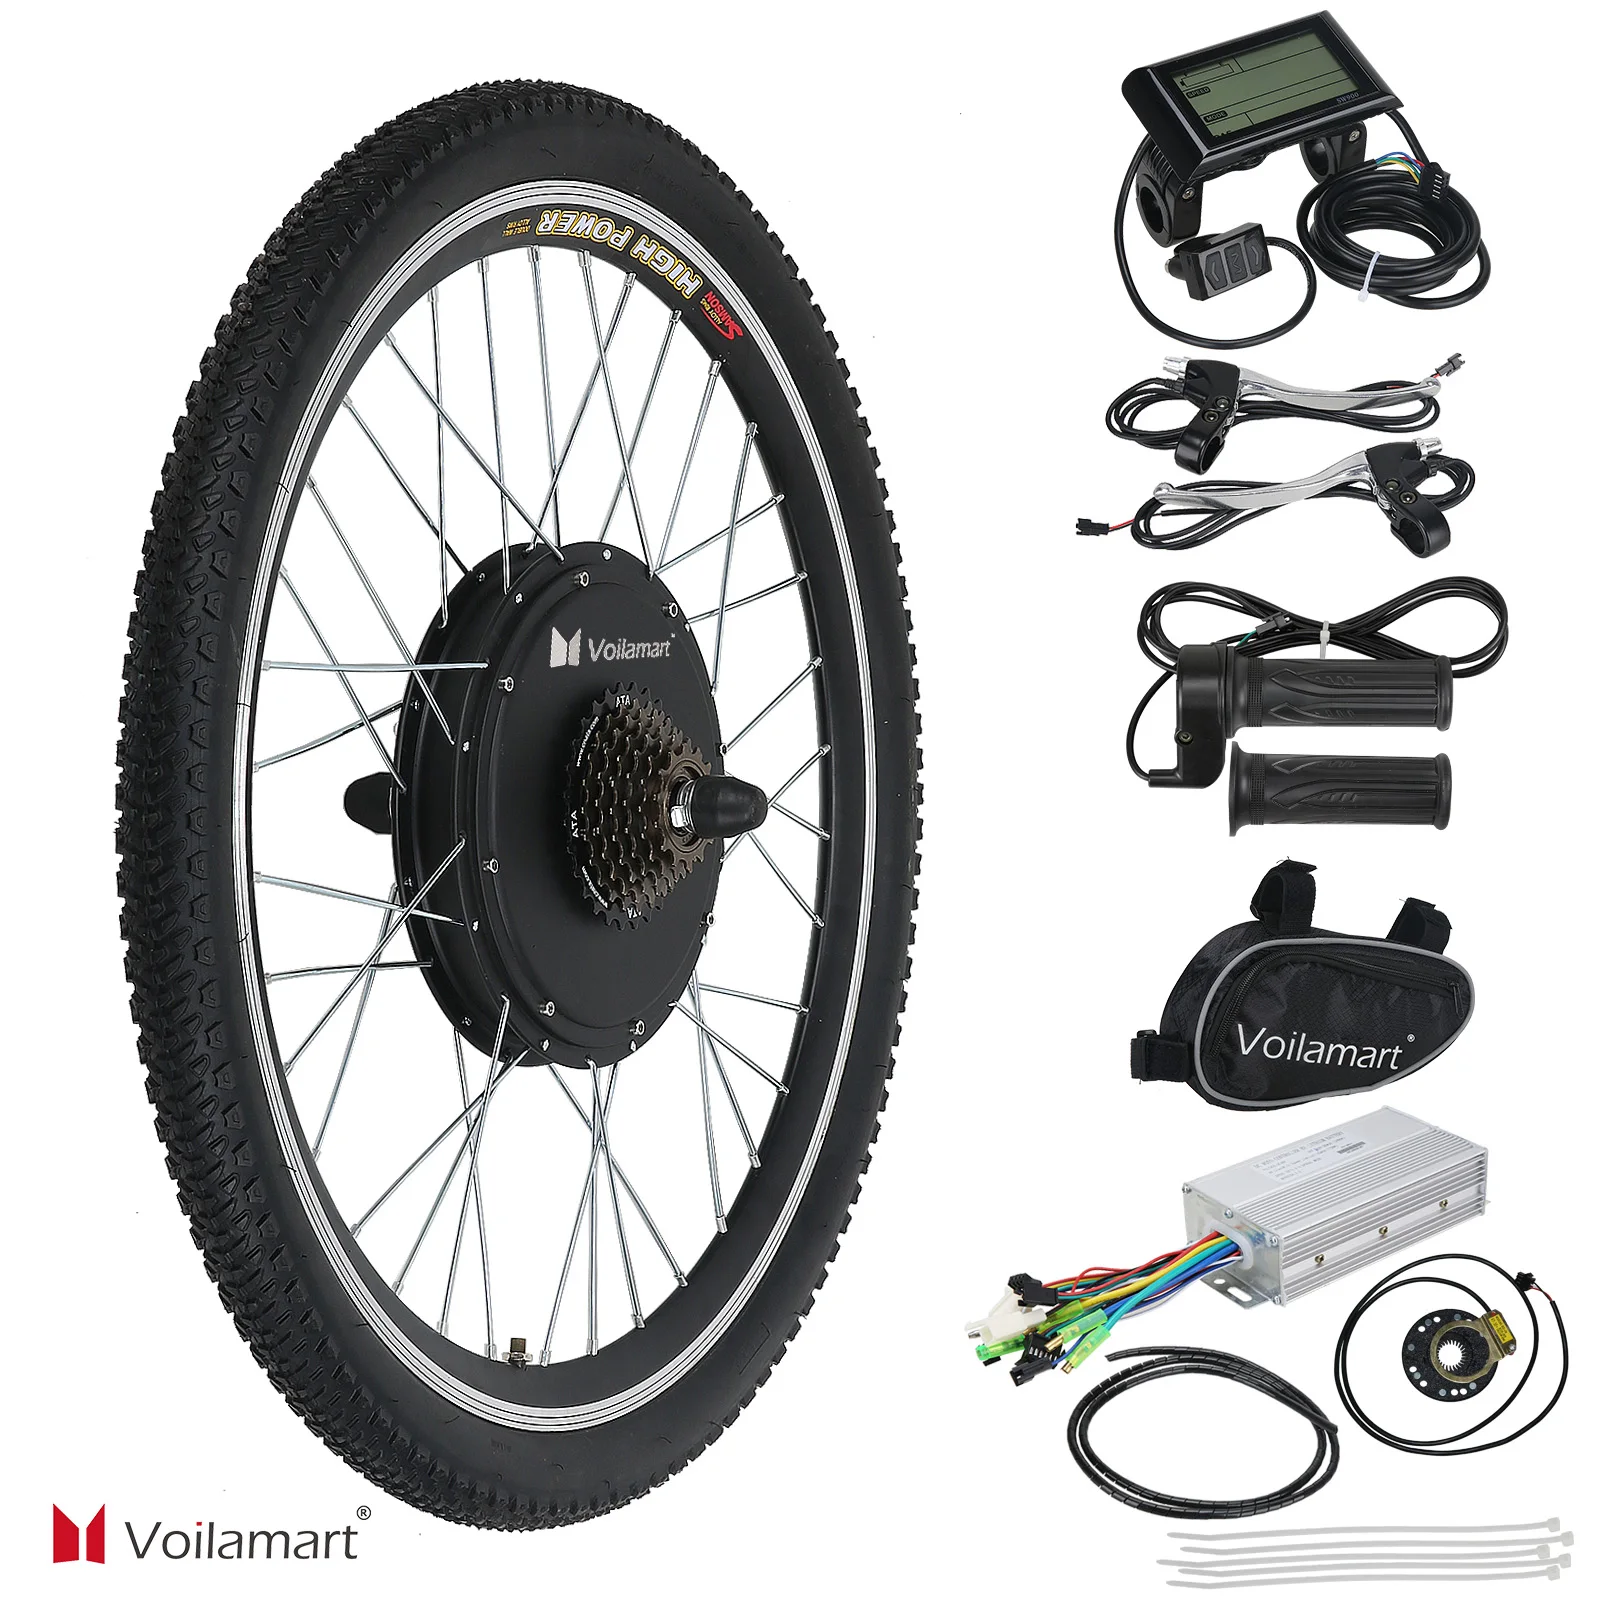 

Voilamart 48V 1000W eBike Conversion Kit 26inch Rear Hub Motor Wheel with LCD Display Electric Bike Kit Free Shipping From UK